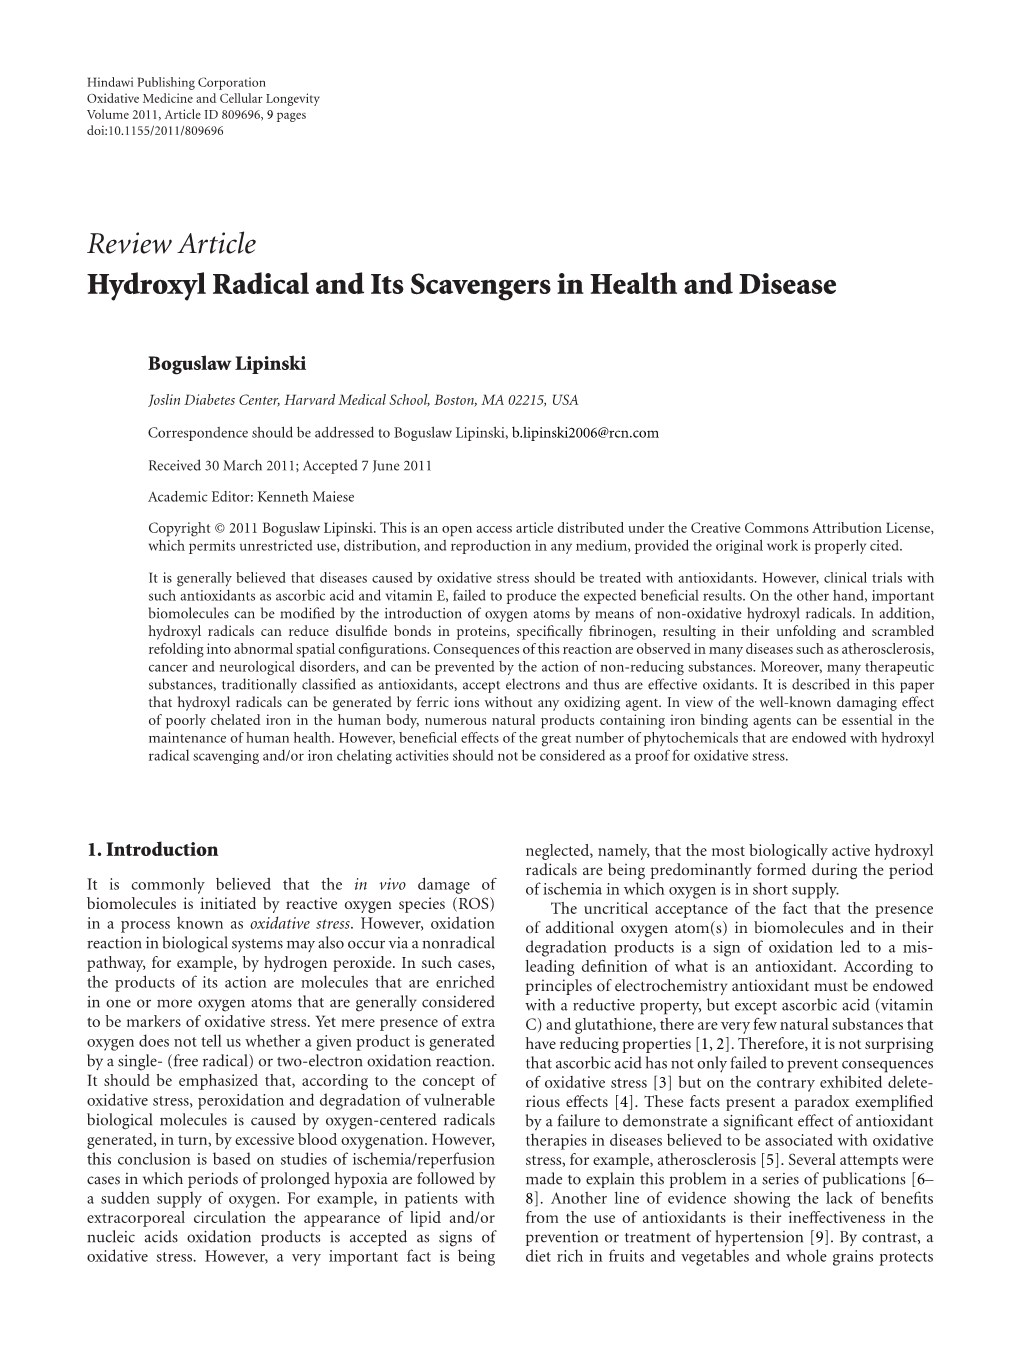 Review Article Hydroxyl Radical and Its Scavengers in Health and Disease